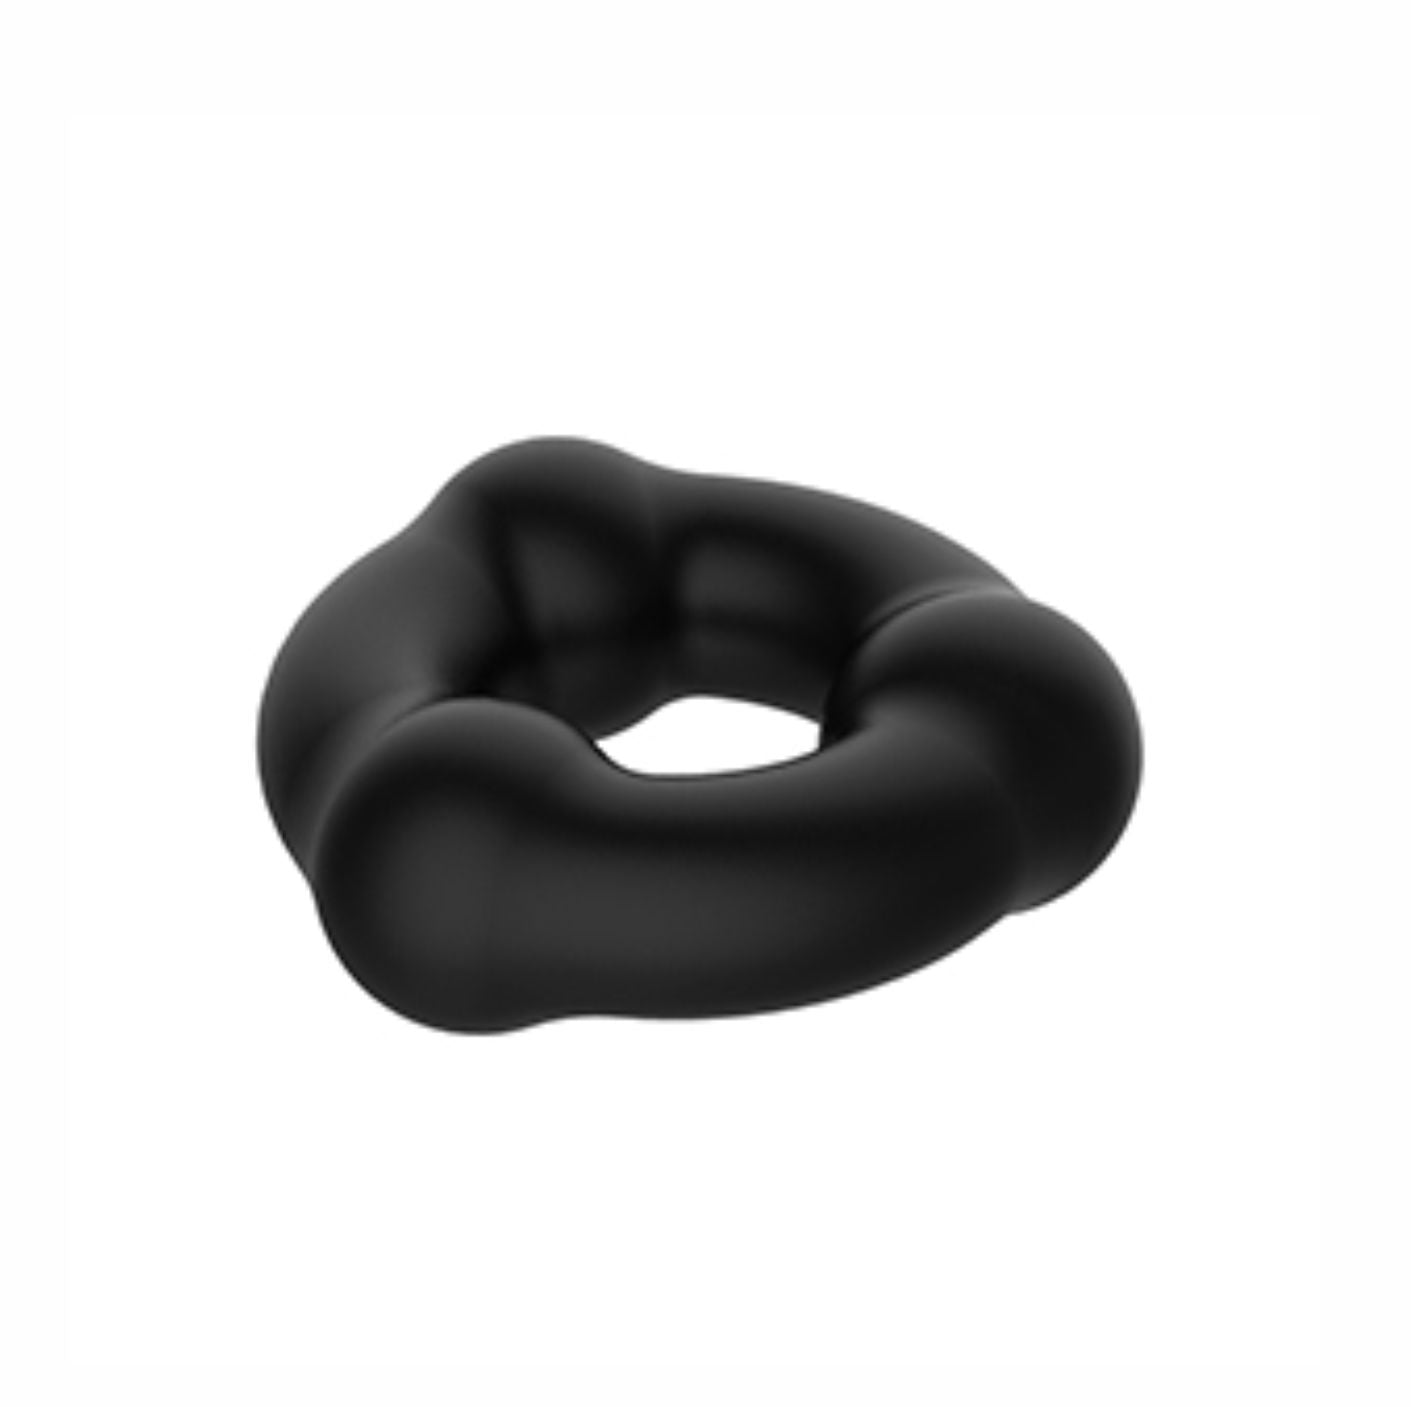 Ribbed Silicone Ring "Crazy Bull" 18mm